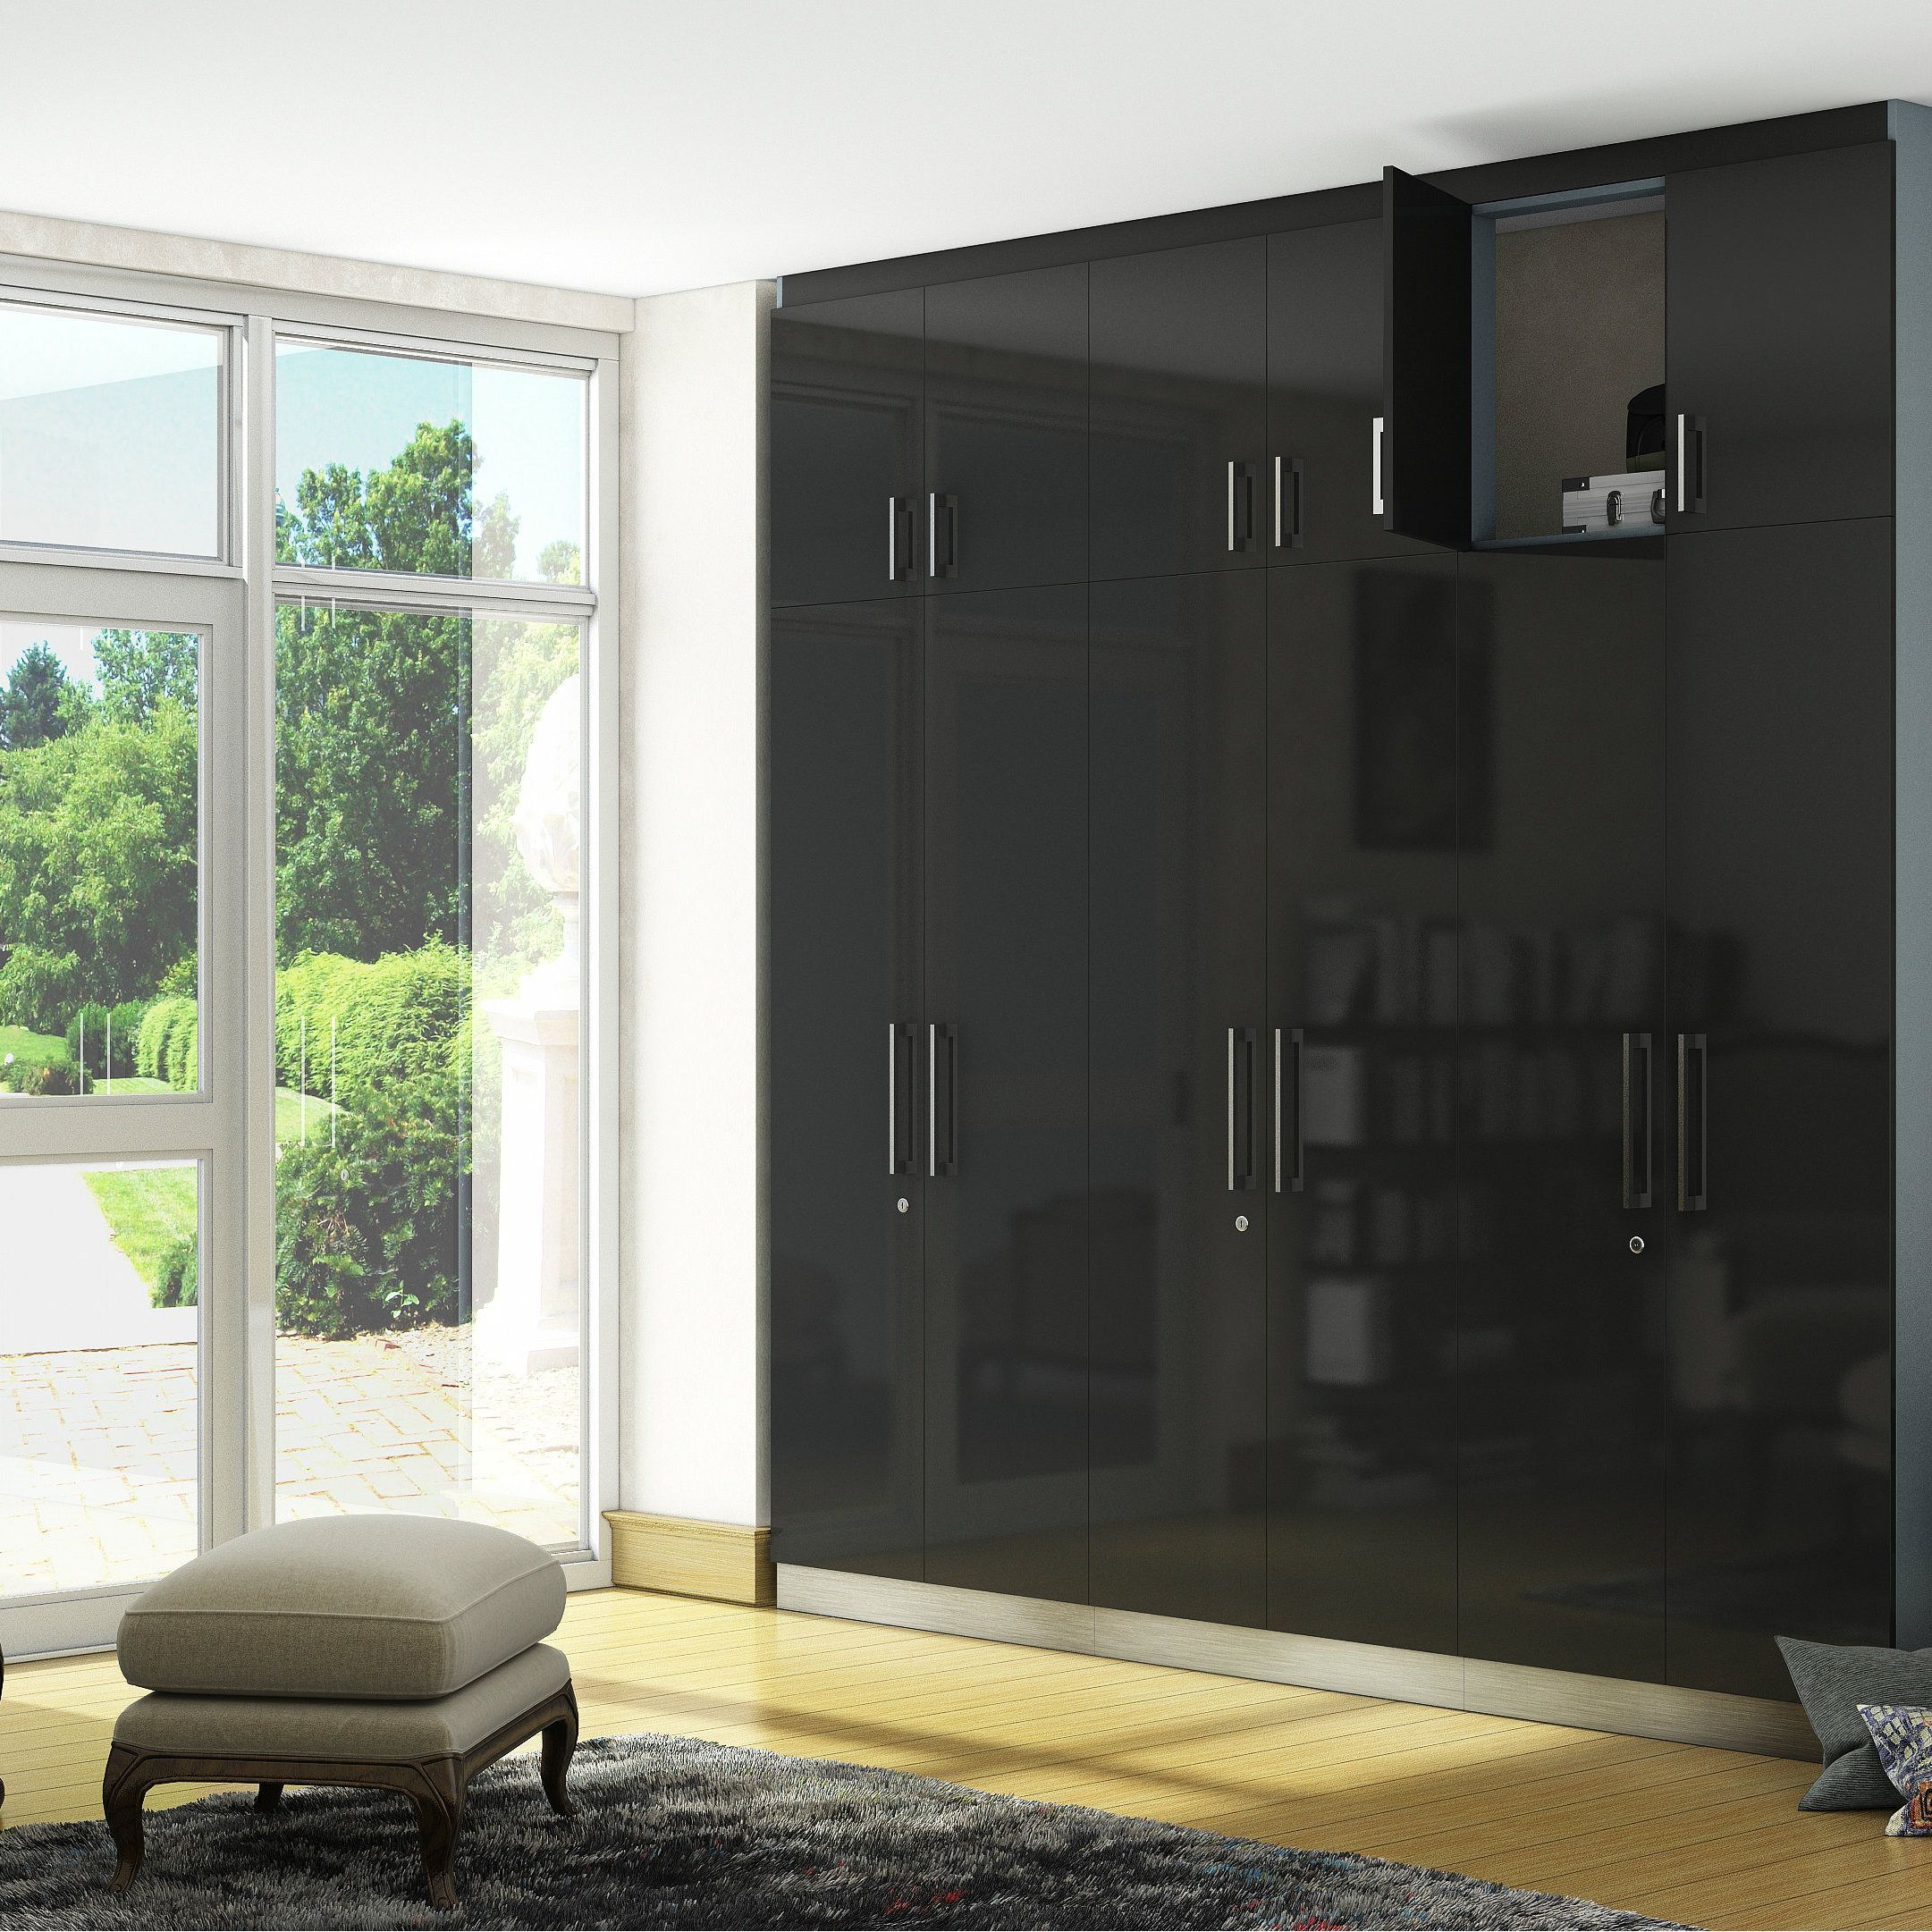 A Glossy Black Wardrobe That Is Every Bit As Impressive And Functional |  Wardrobe Design, Furniture Design, Grey Wardrobe Inside Black High Gloss Wardrobes (View 5 of 20)